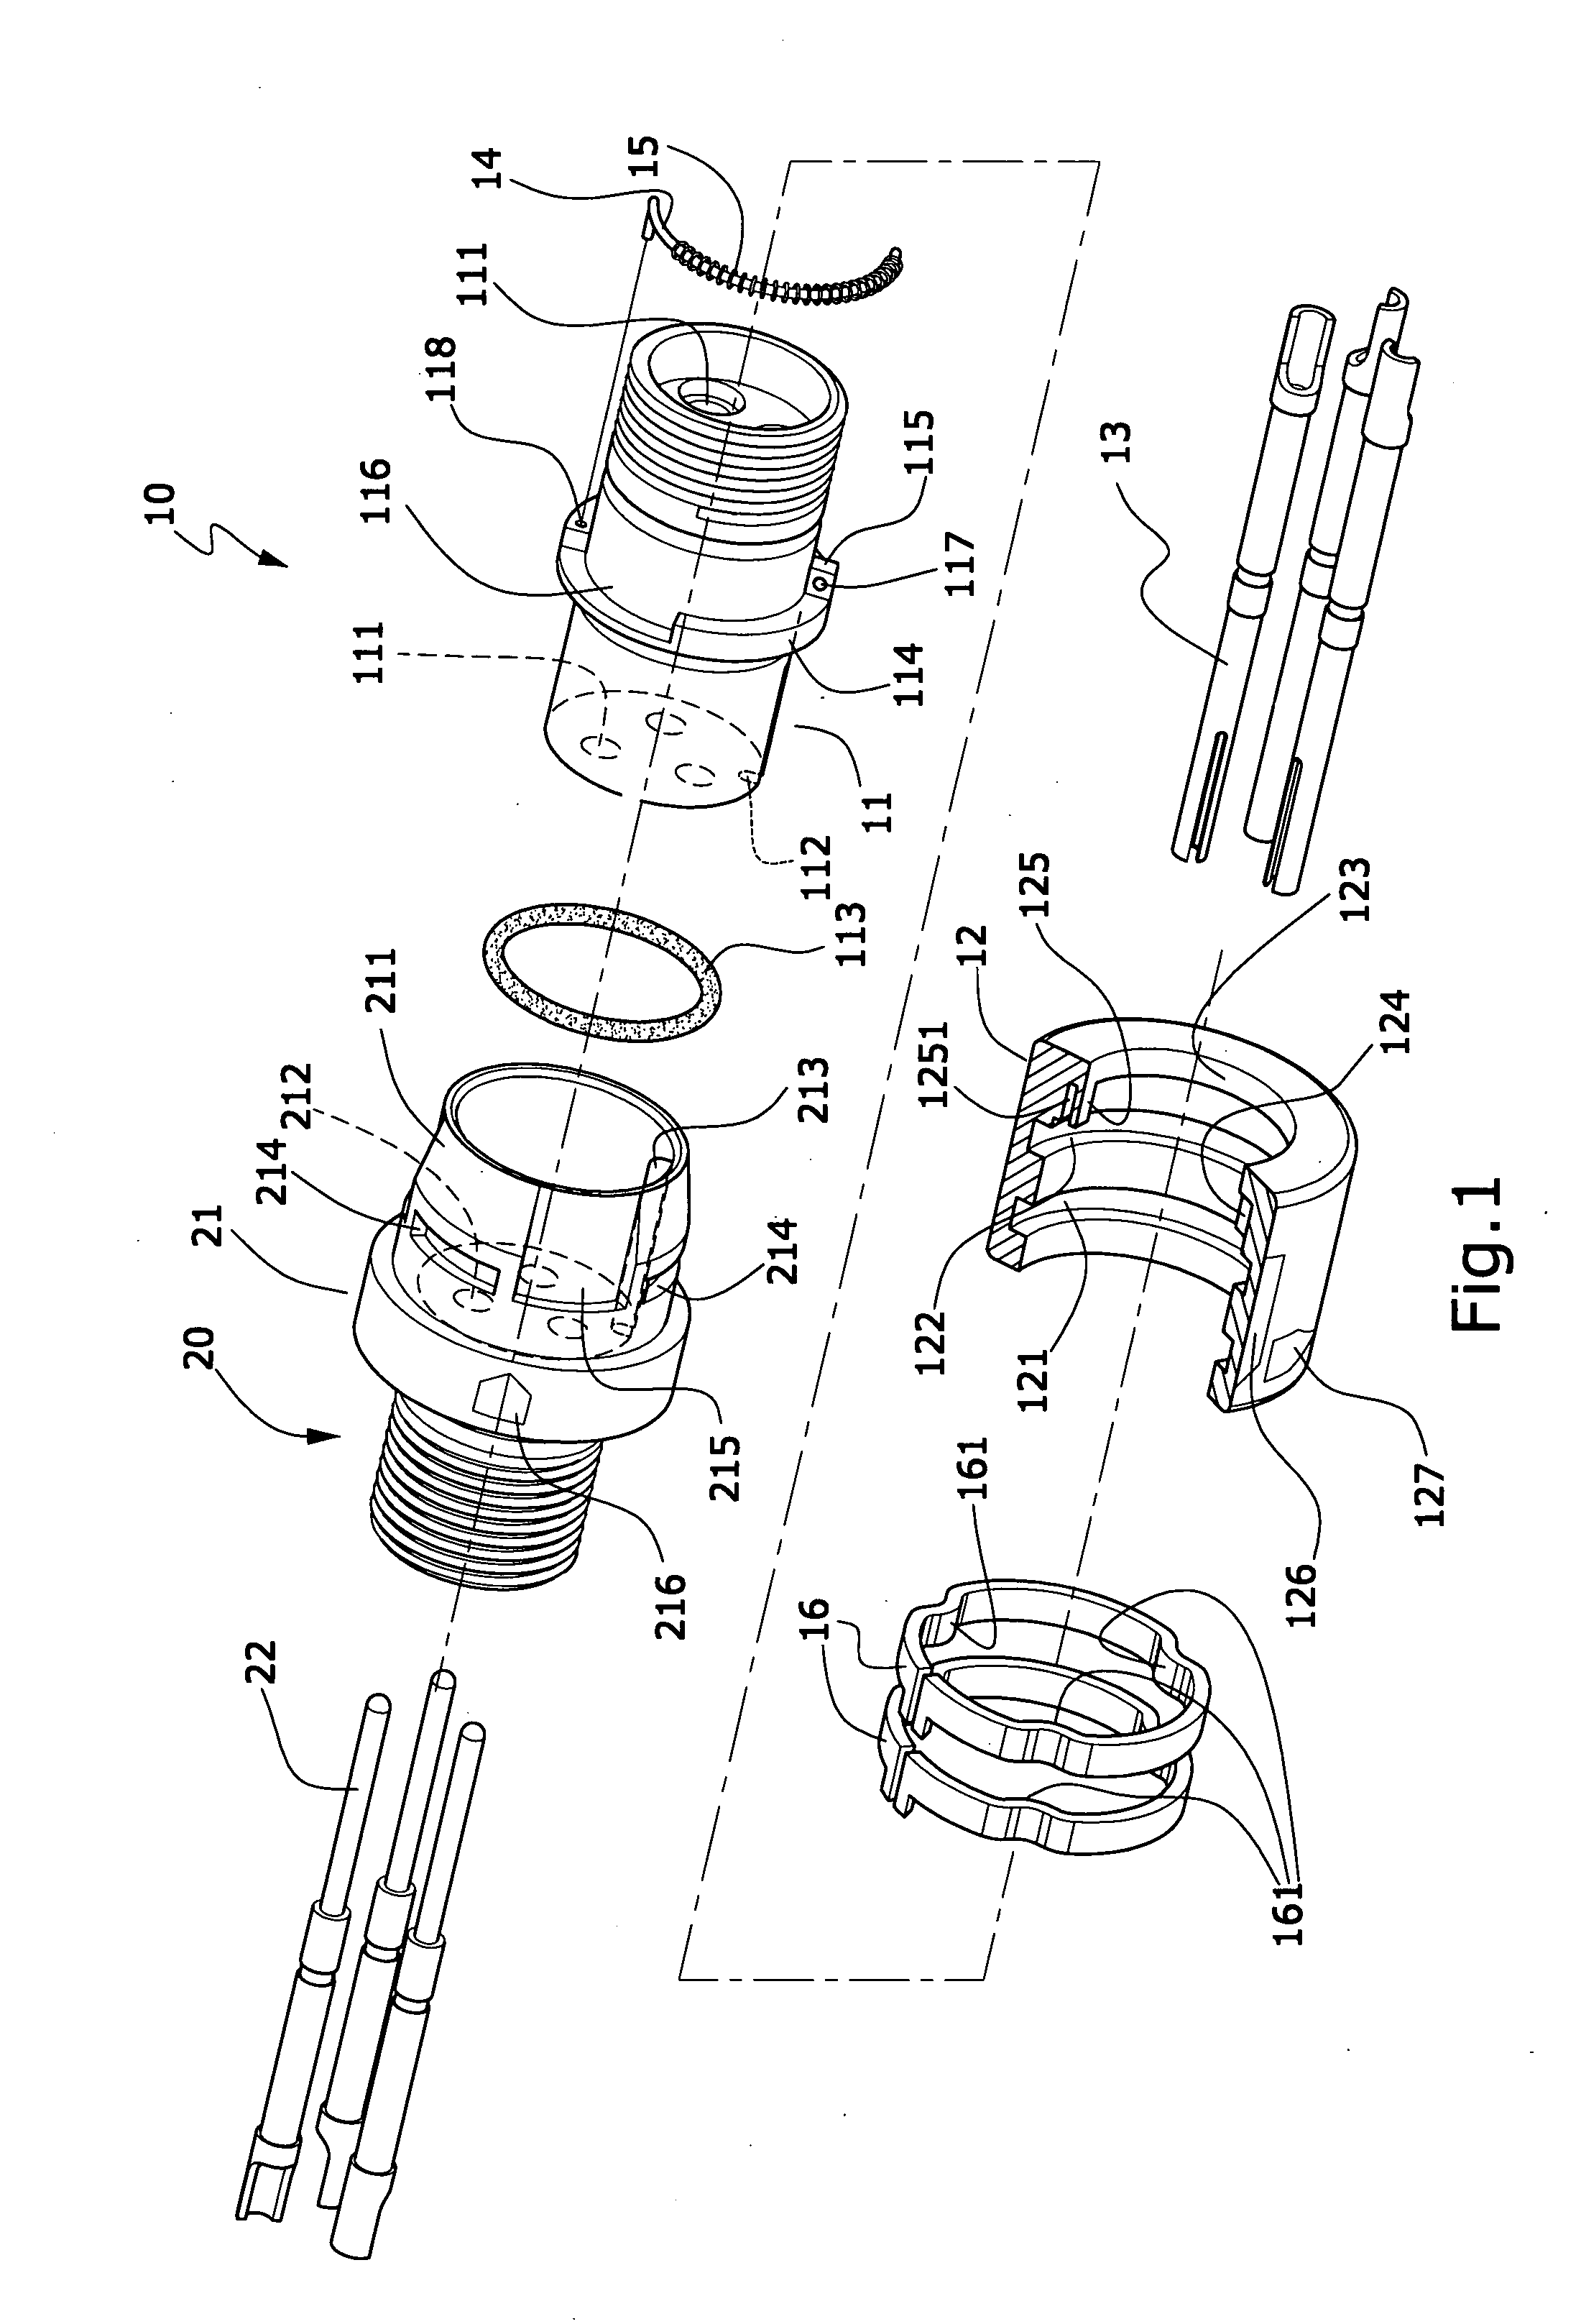 Fast coupling structure of waterproof cable connector